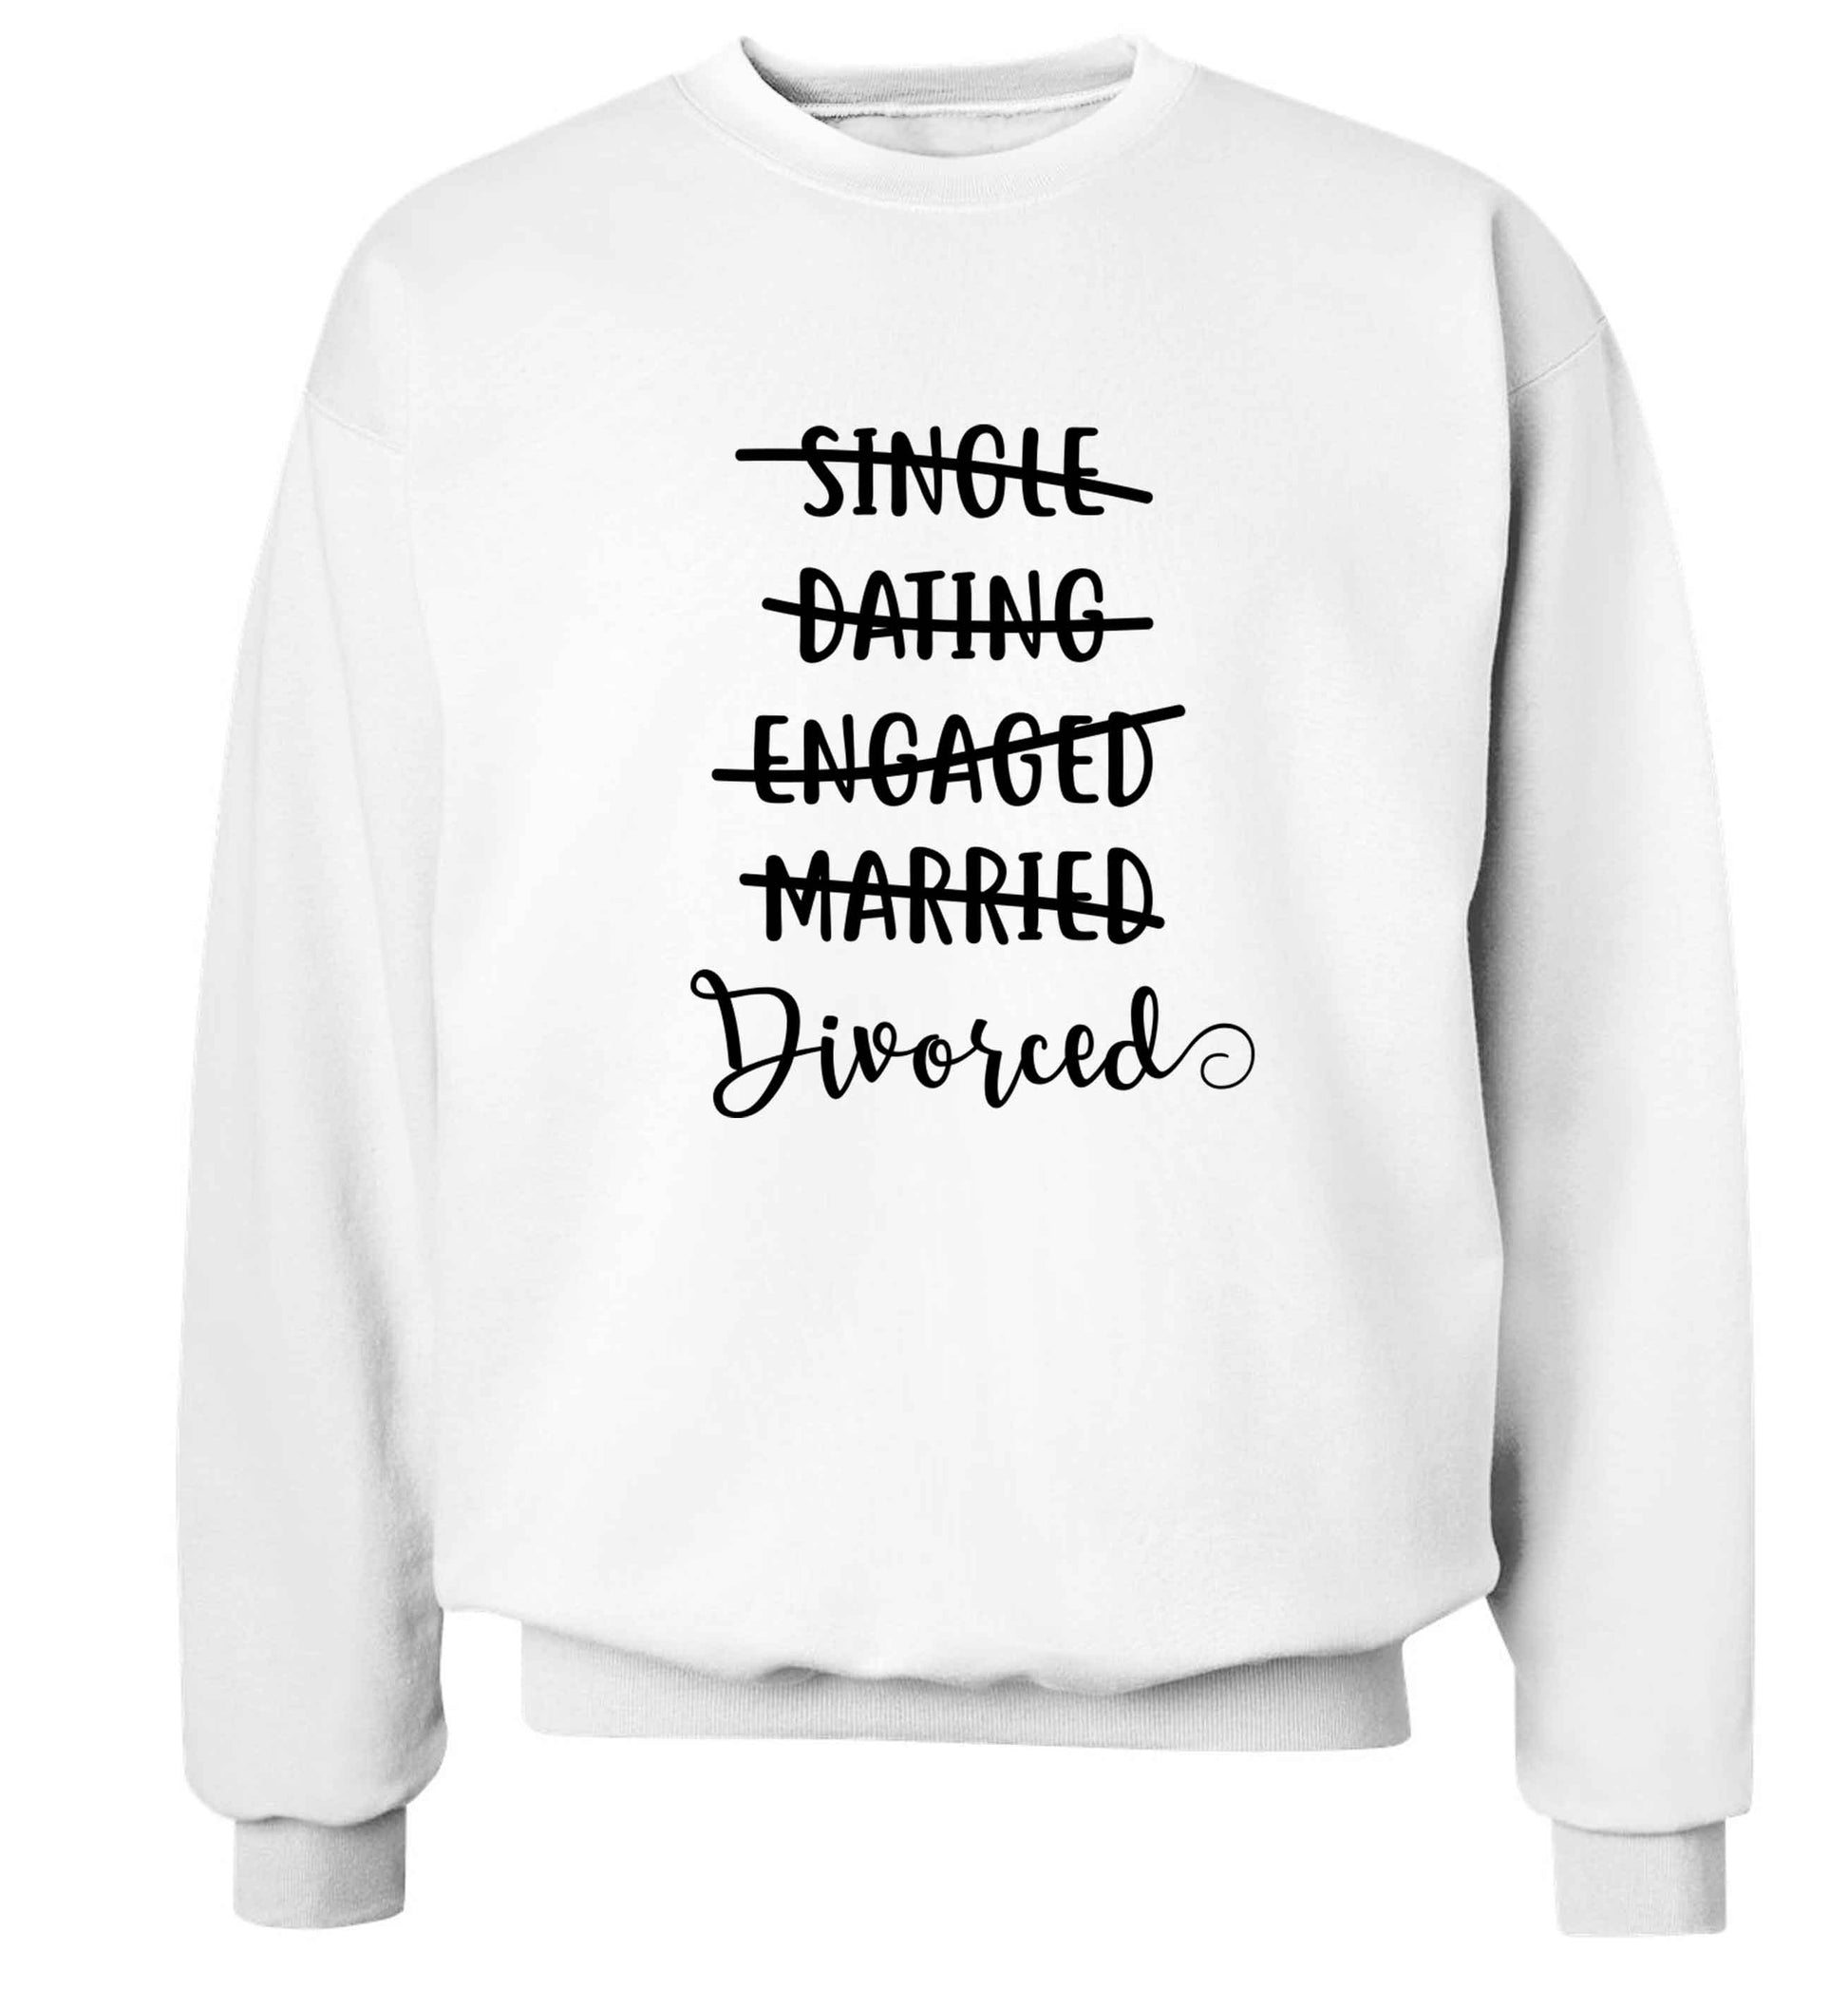 Single, dating, engaged, divorced Adult's unisex white Sweater 2XL